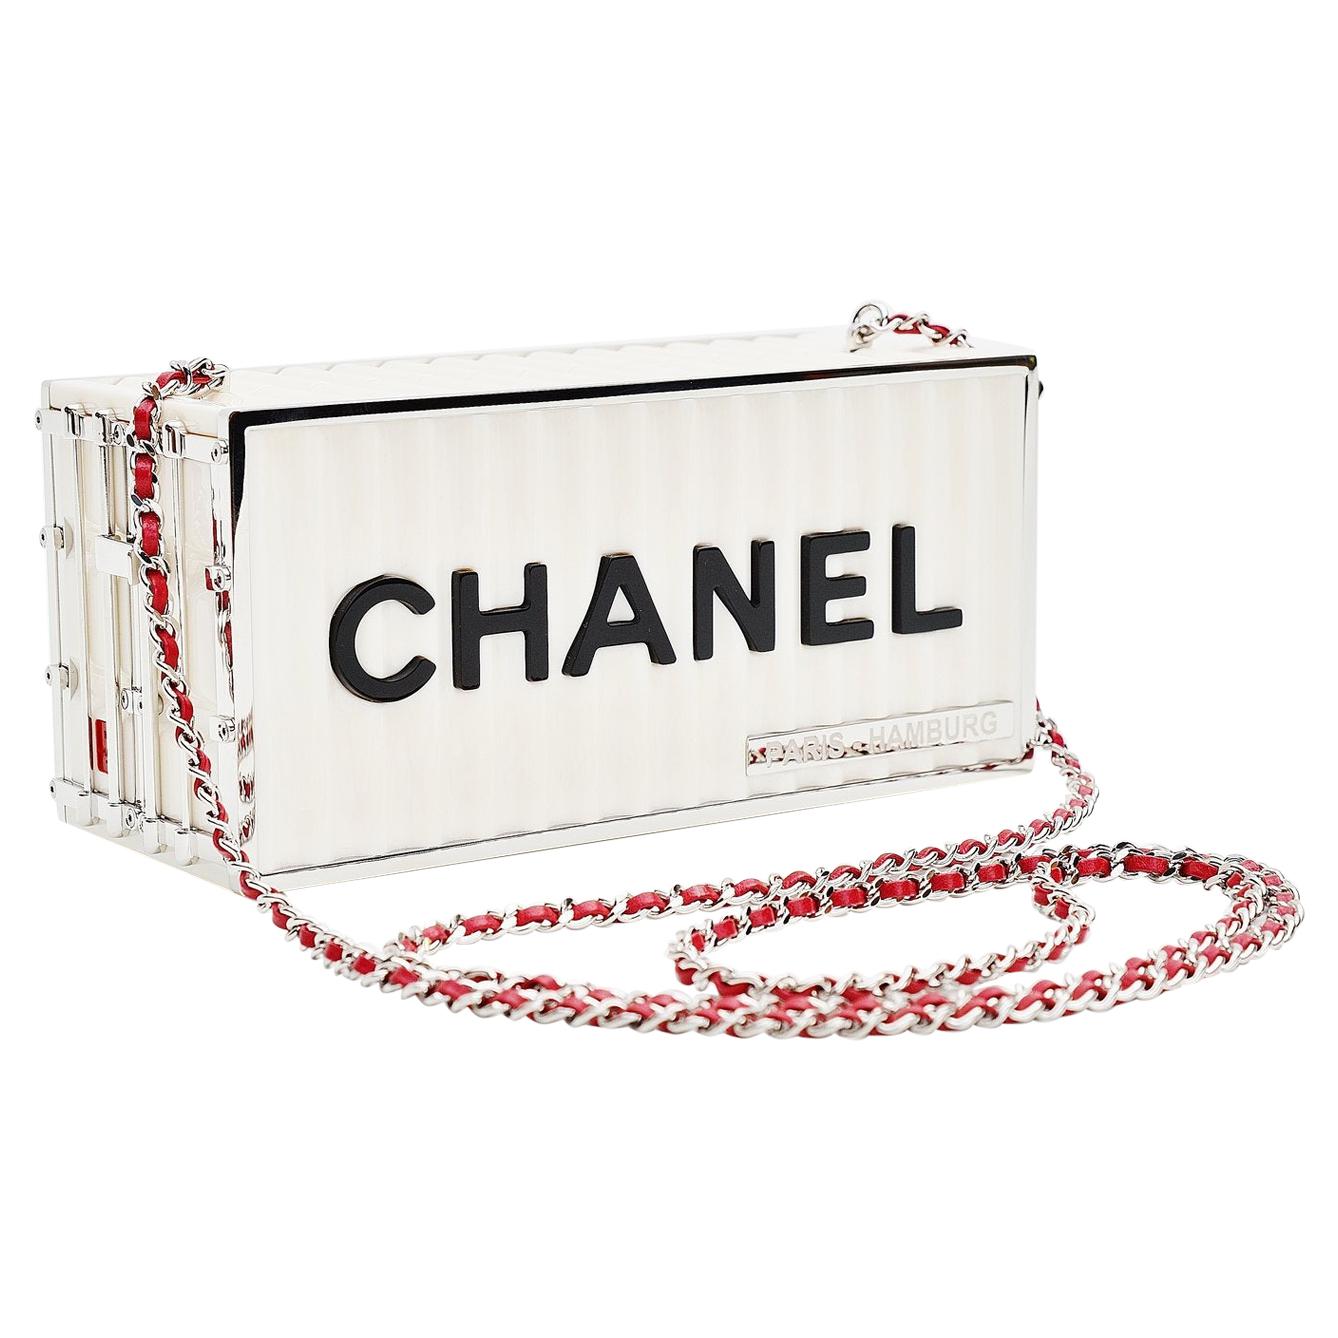 Chanel Runway Container Clutch/ Shoulder Bag Karl Lagerfeld NEW